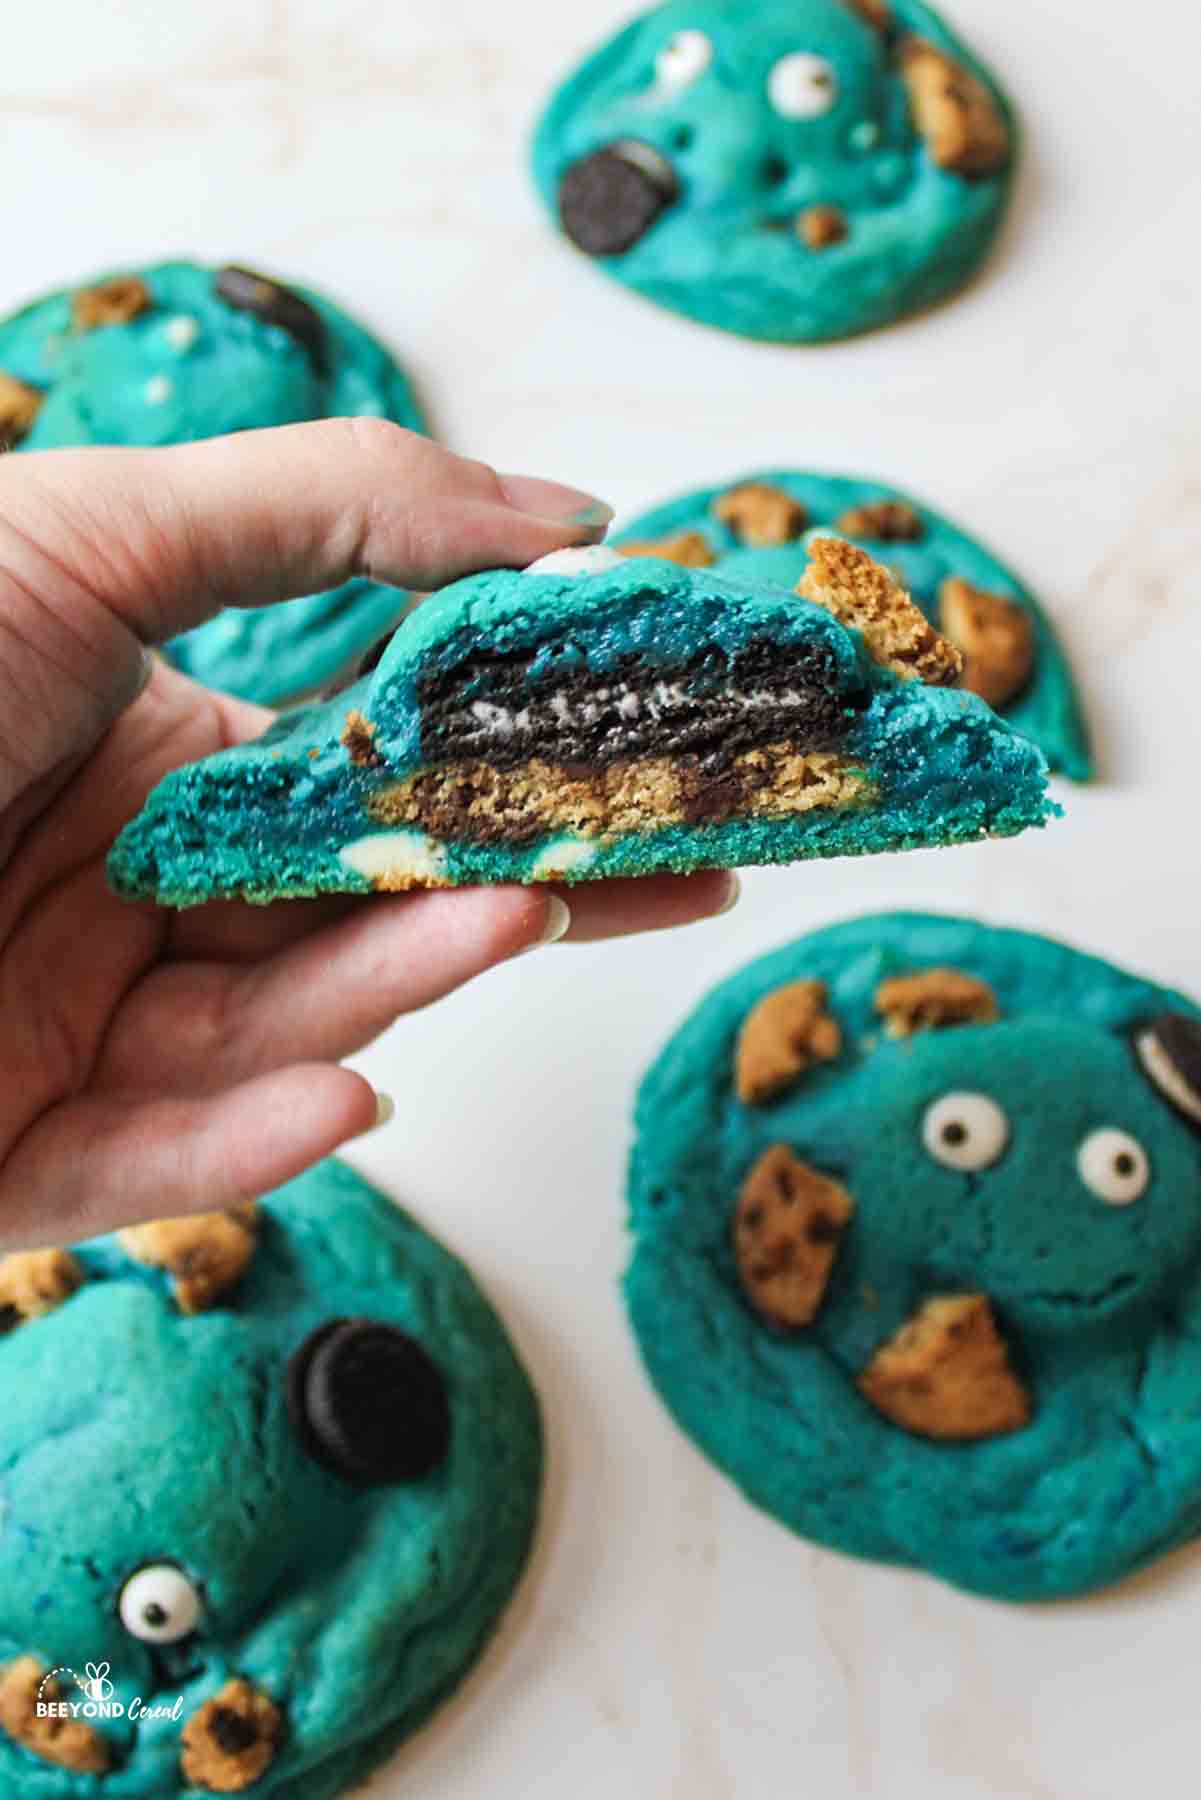 a hand holding up half of a cookie monster cookie above other scattered cookies